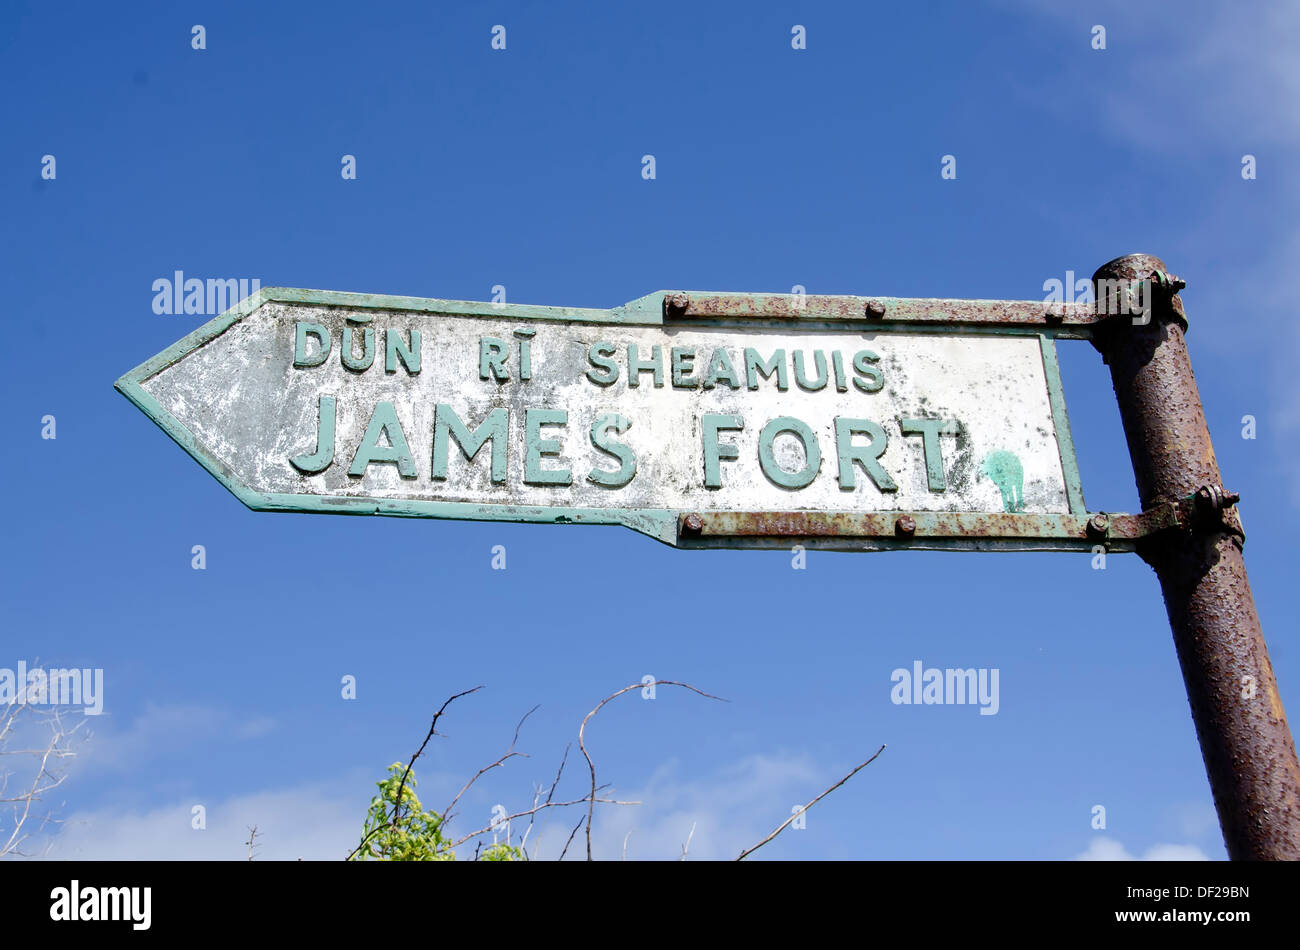 English and Gaelic language sign pointing to historic James Fort which guarded the harbour entrance at Kinsale, Ireland. Stock Photo